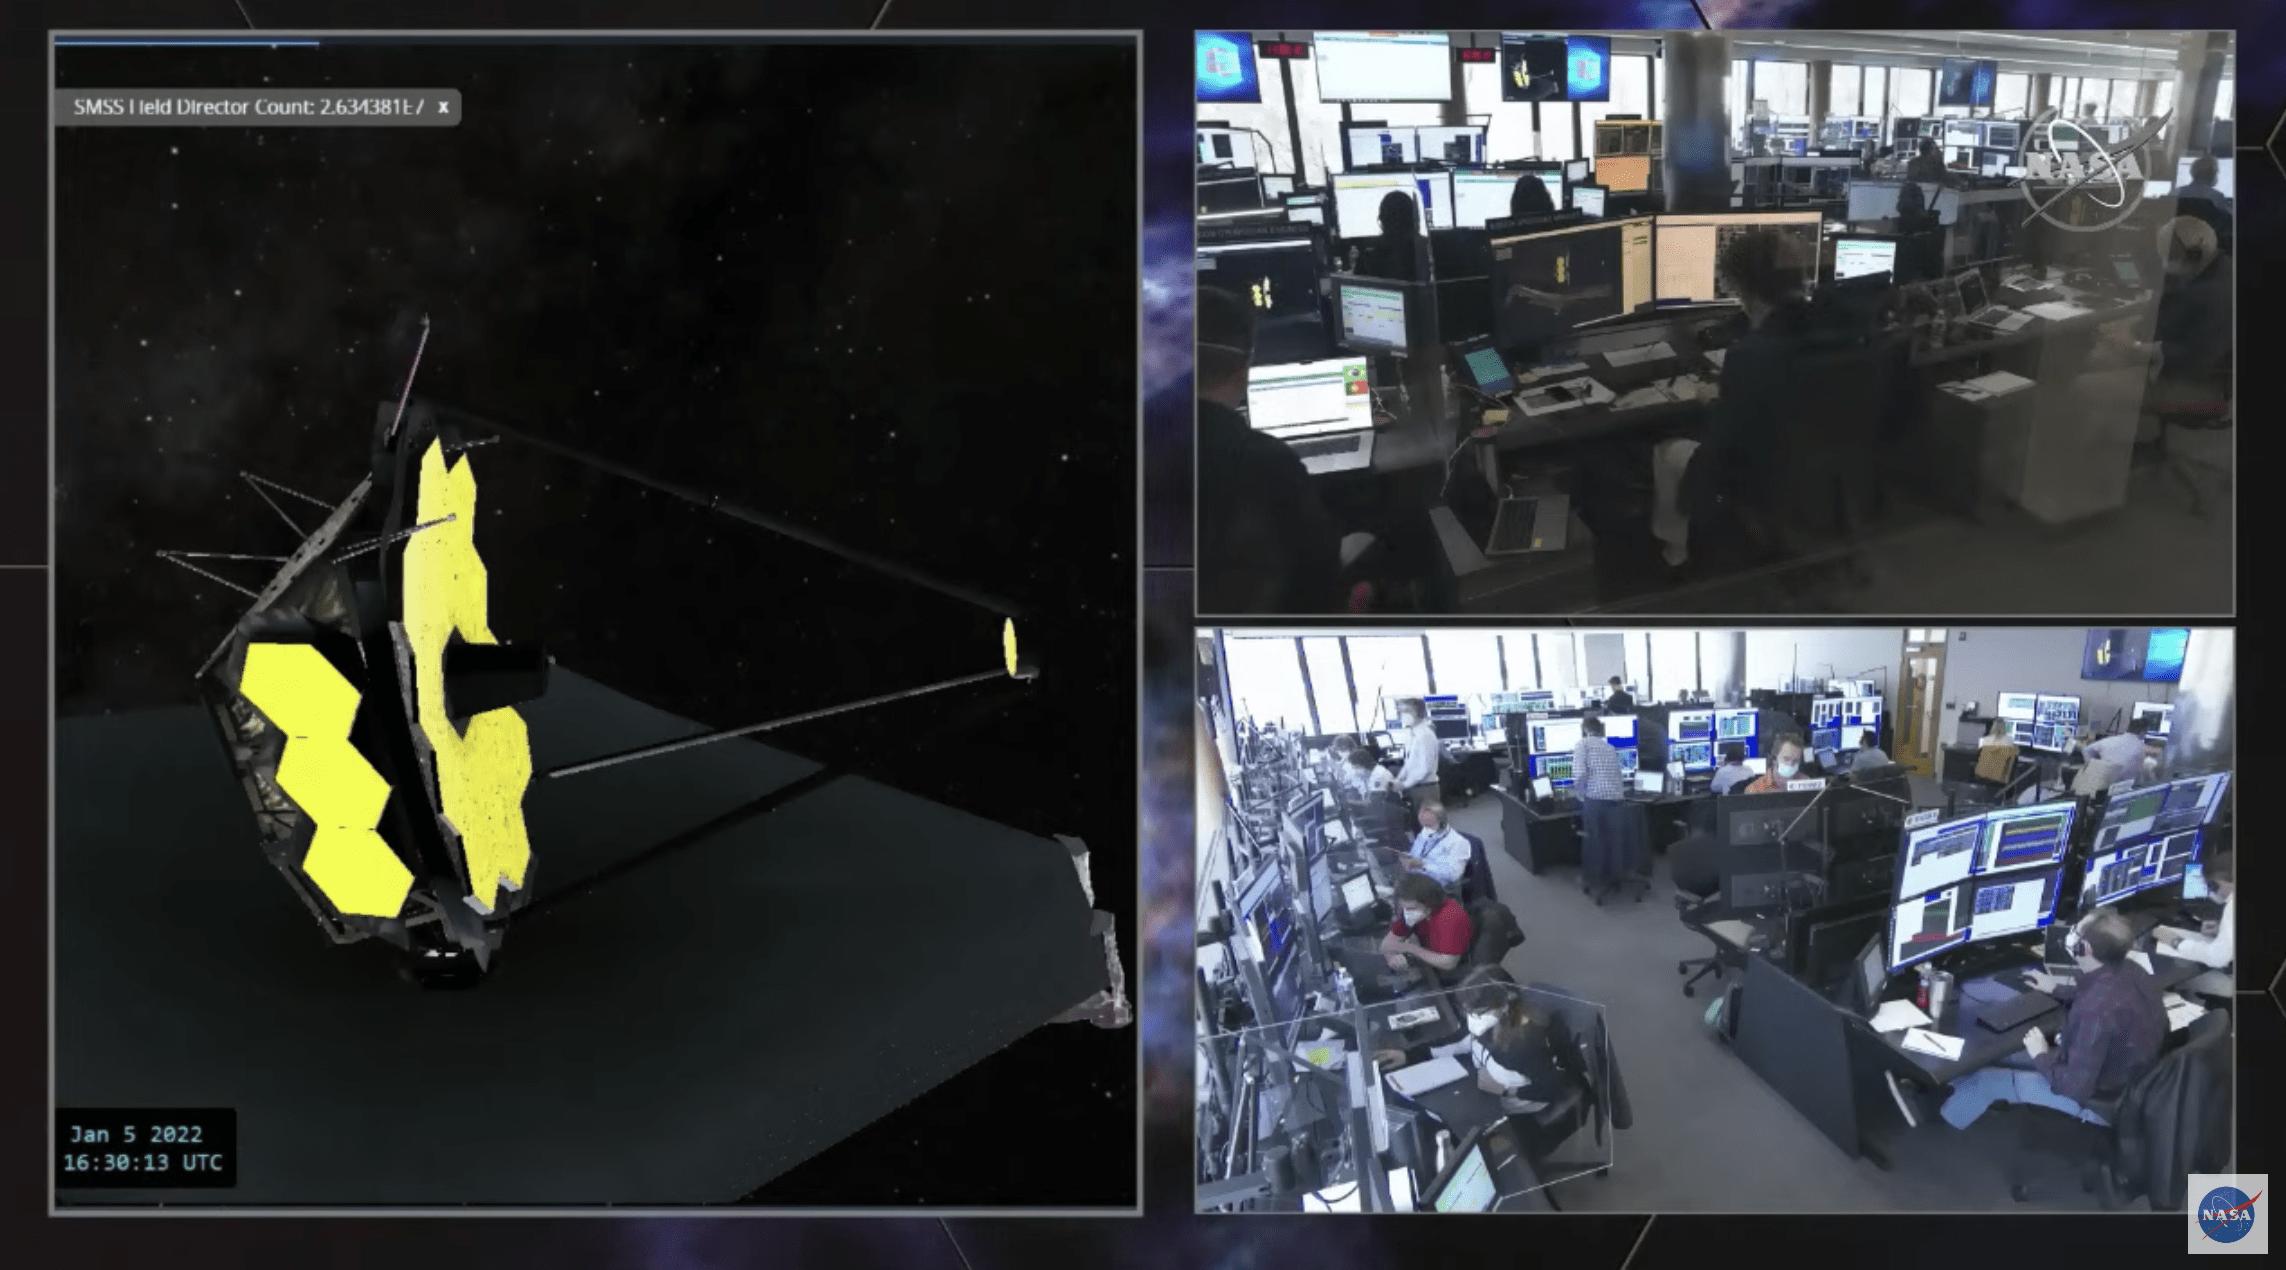 Screenshot from NASA's broadcast of the secondary mirror deployment, showing an animated view of the Webb telescope and the control rooms.  (Screenshot: NASA TV)